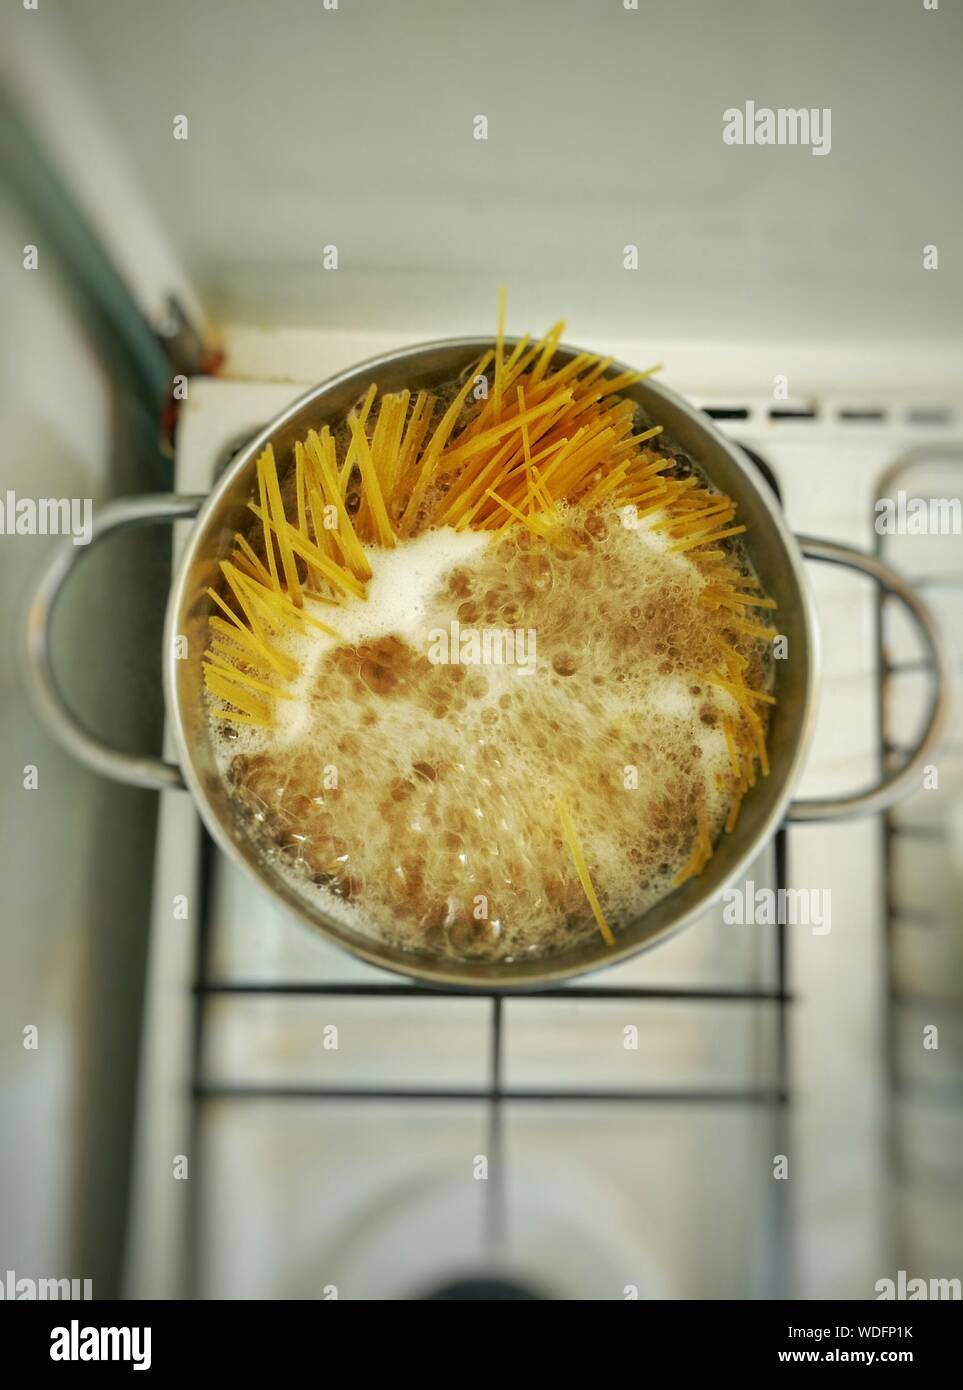 High Angle View Of Spaghetti In Boiling Water Stock Photo